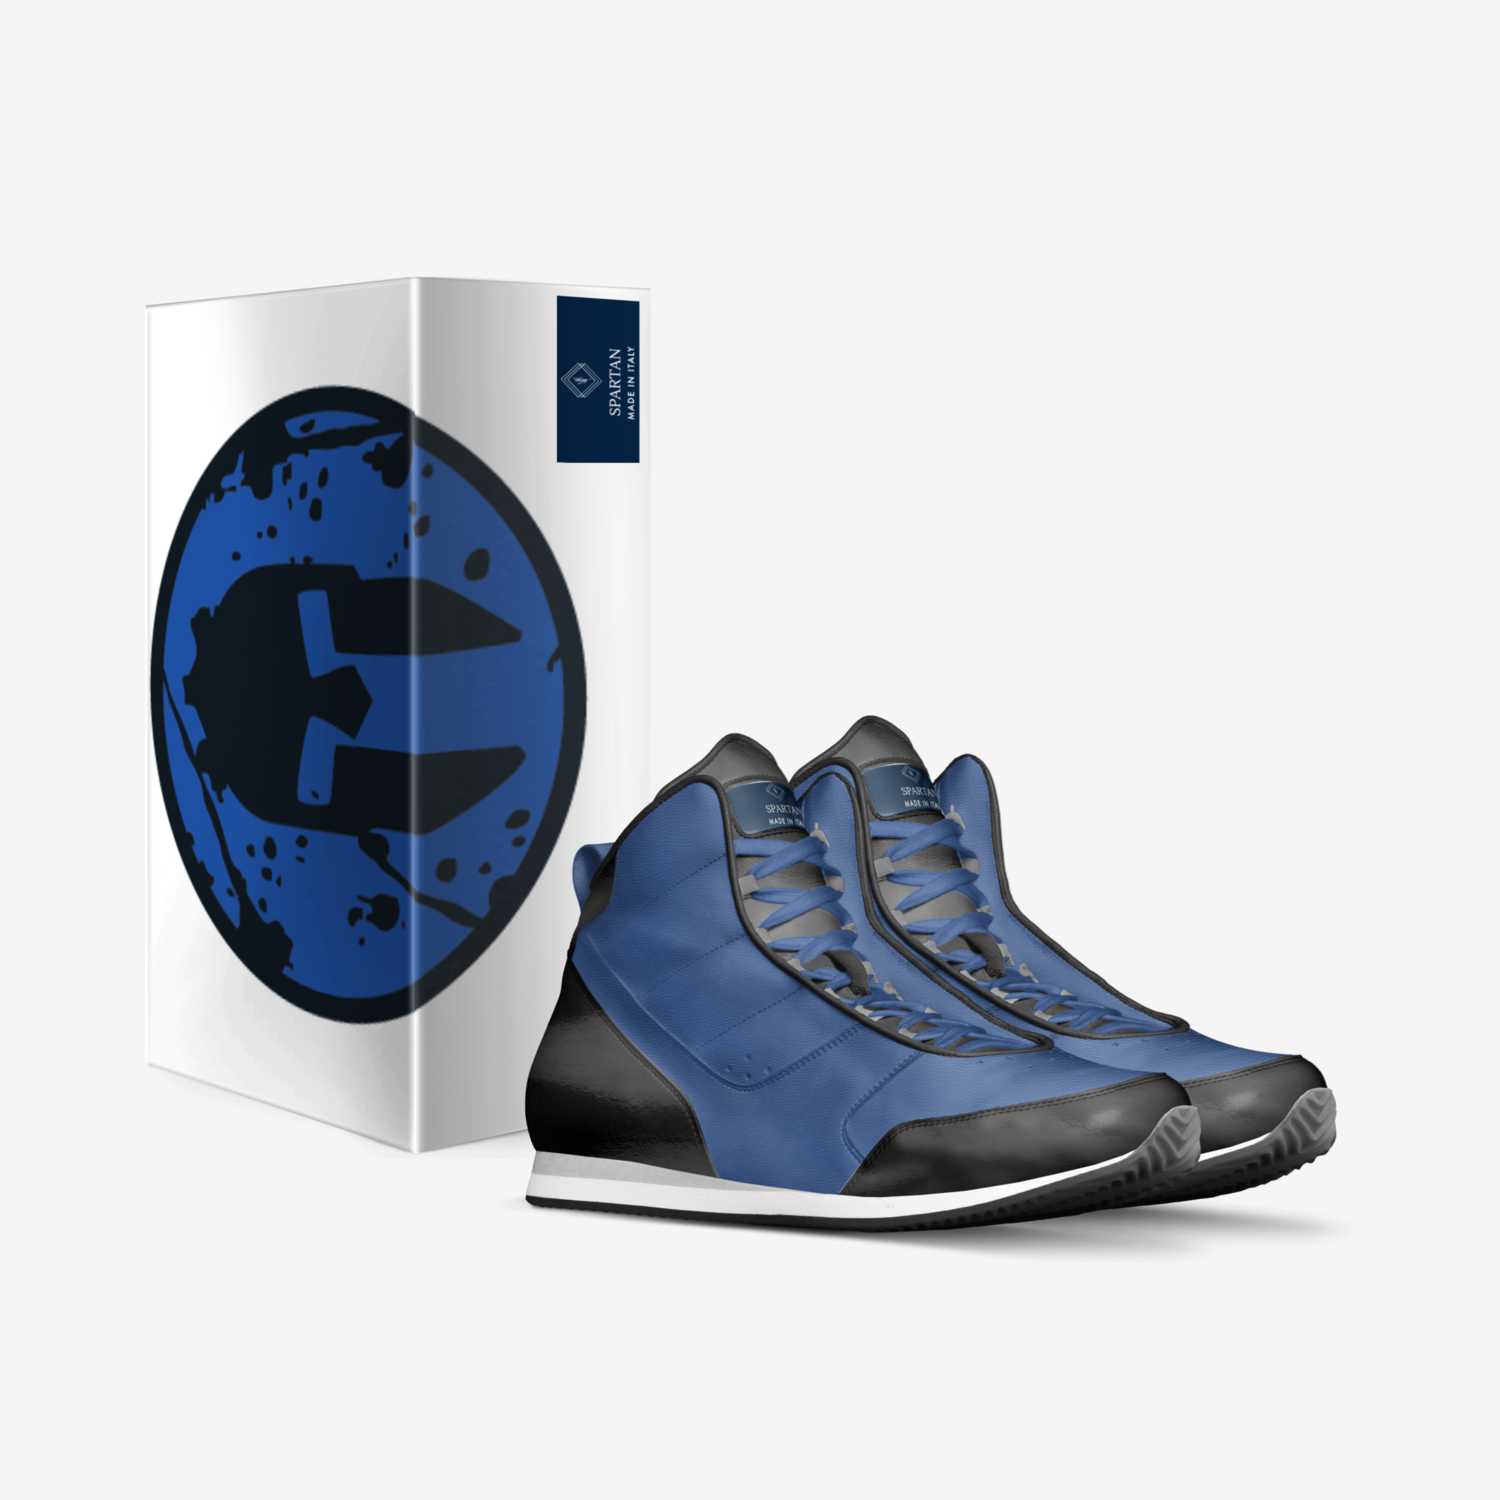 SPARTAN custom made in Italy shoes by 𝔄𝔭𝔥𝔯𝔬𝔡𝔦𝔱𝔢 | Box view